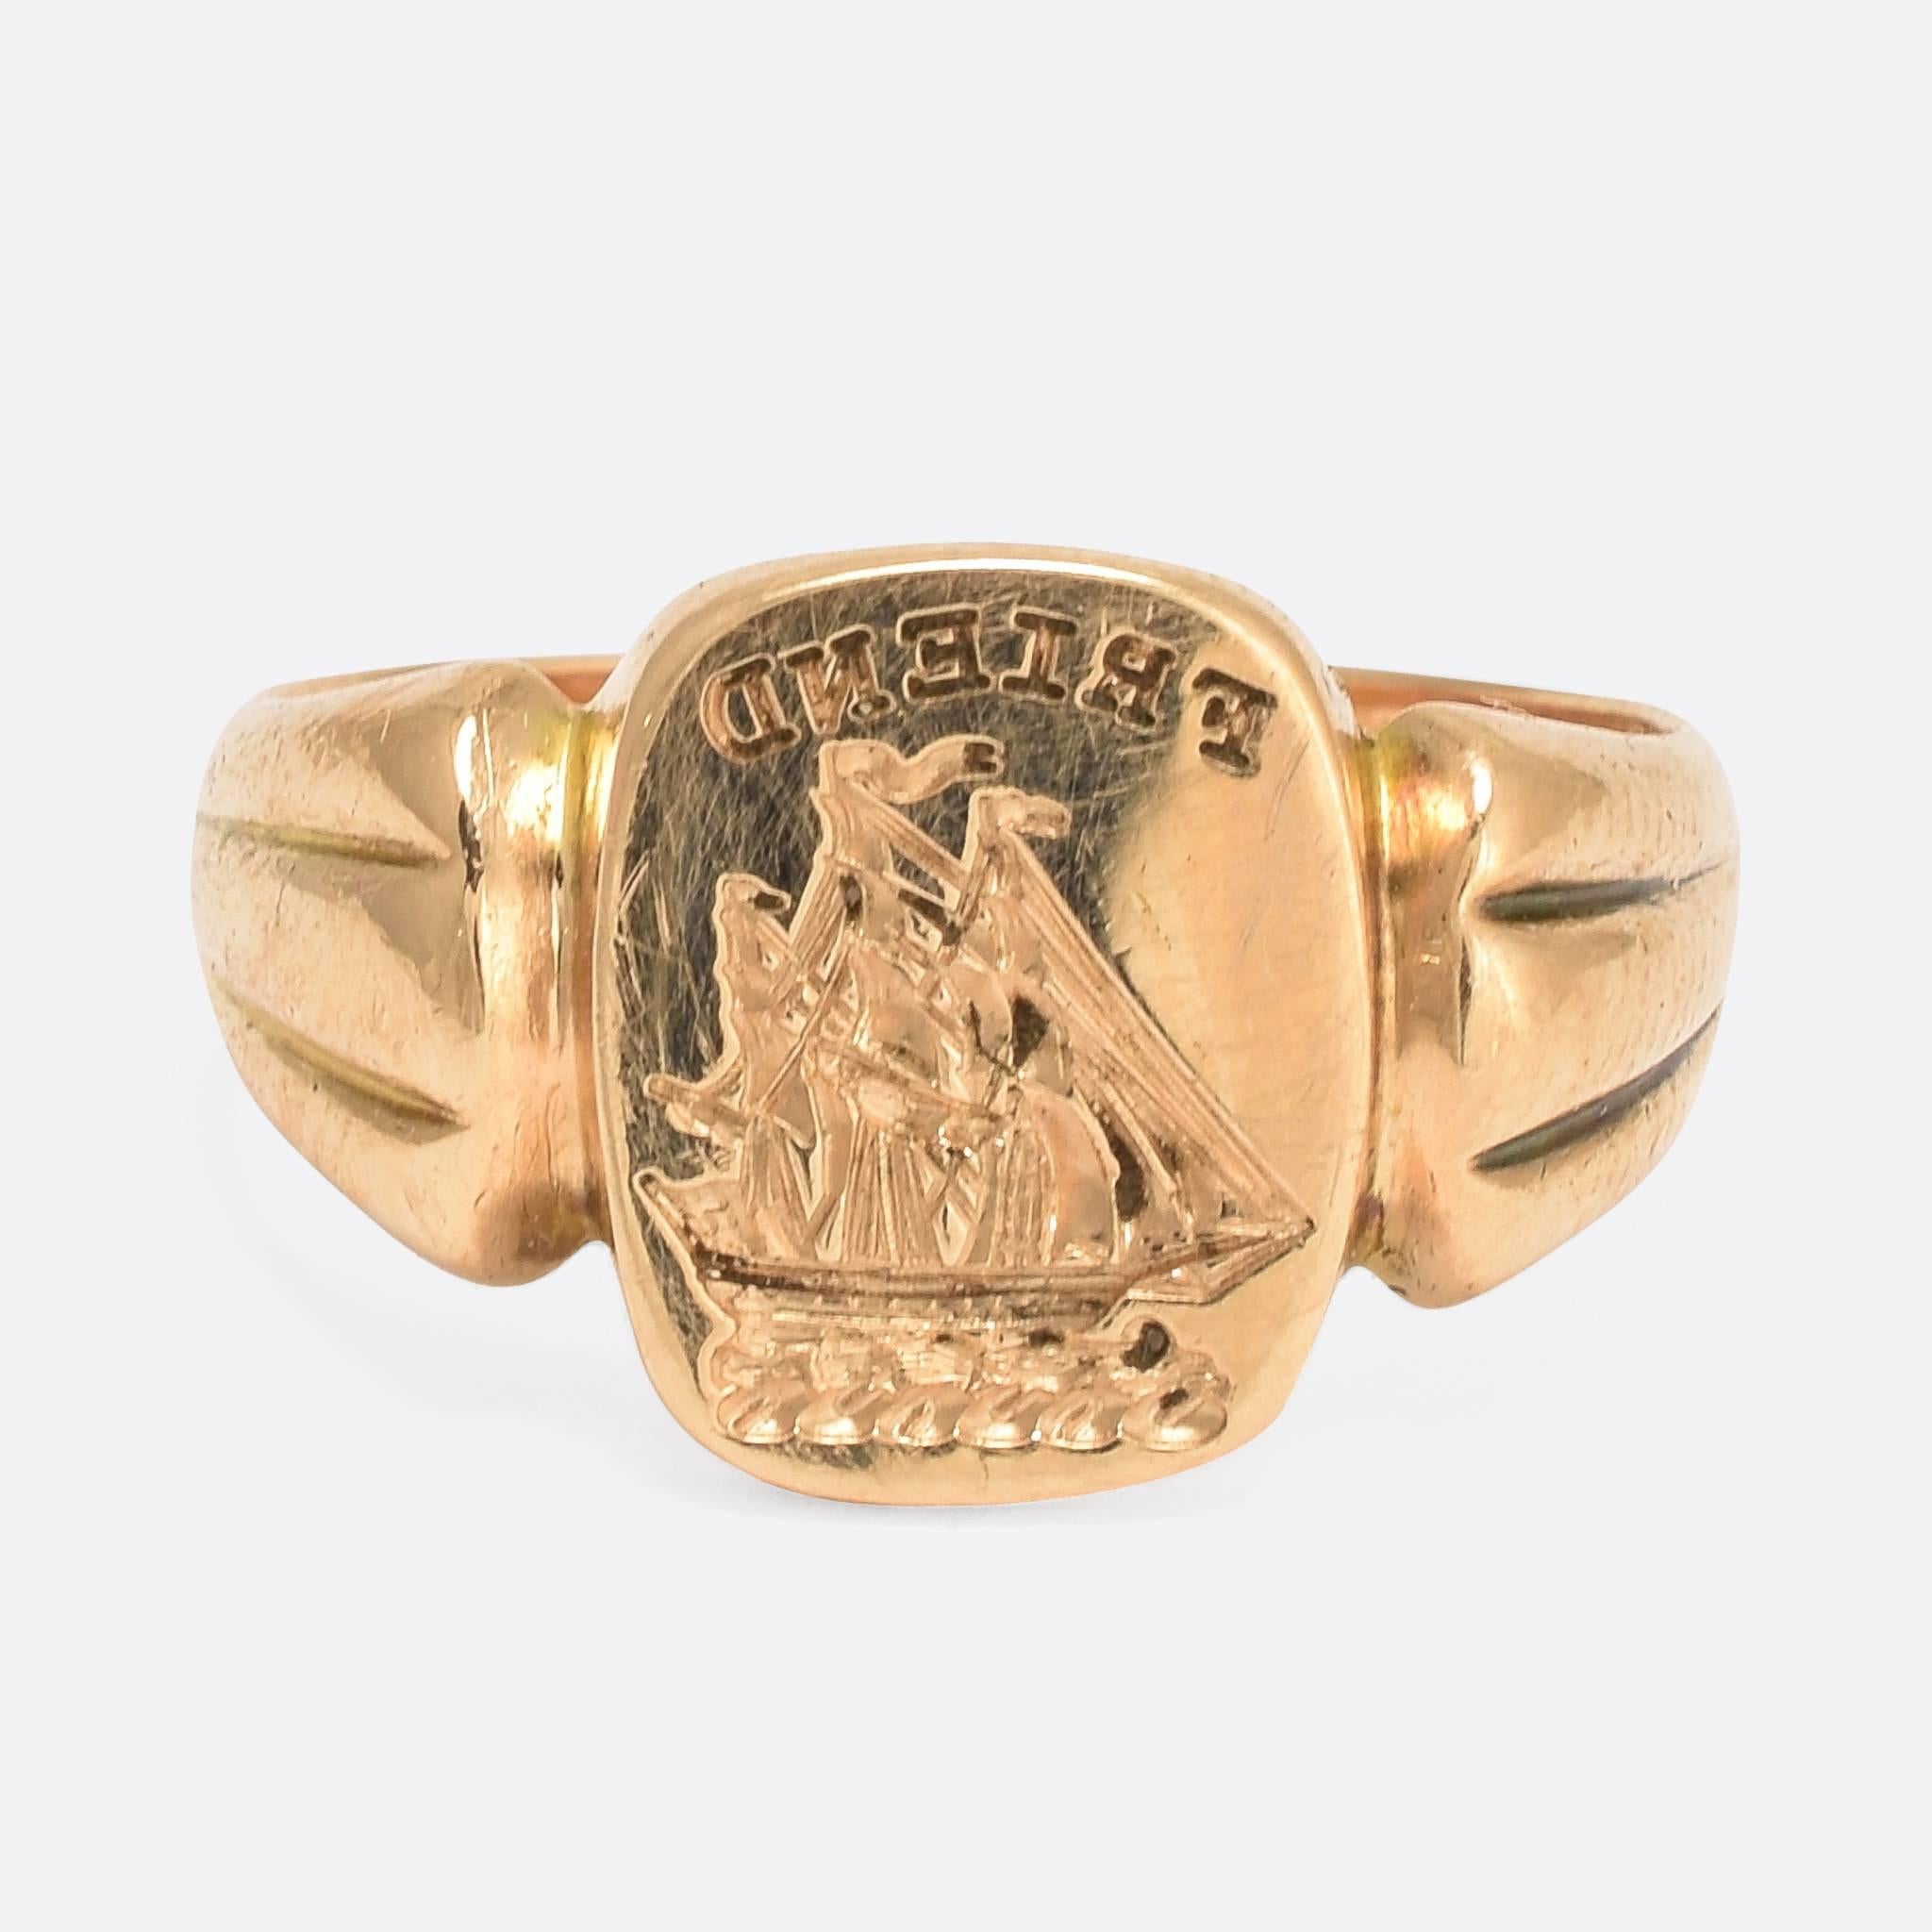 This exceptional antique Signet Ring is carved with a charming intaglio crest: that of a ship, in full sail, underneath the word 